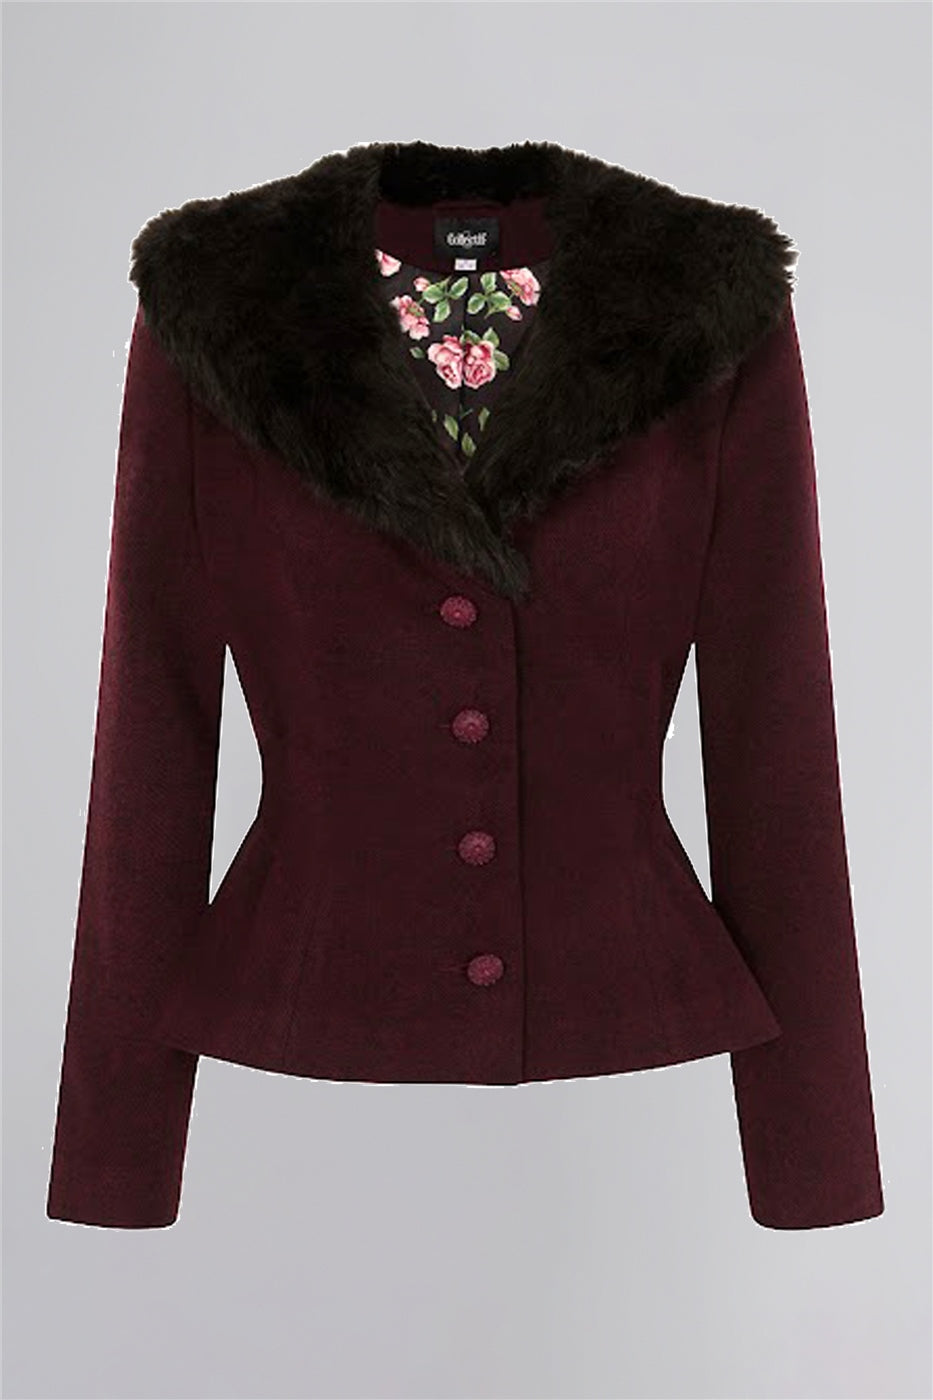 Molly burgundy fitted vintage style jacket with pink rose print lining  on a plain grey background